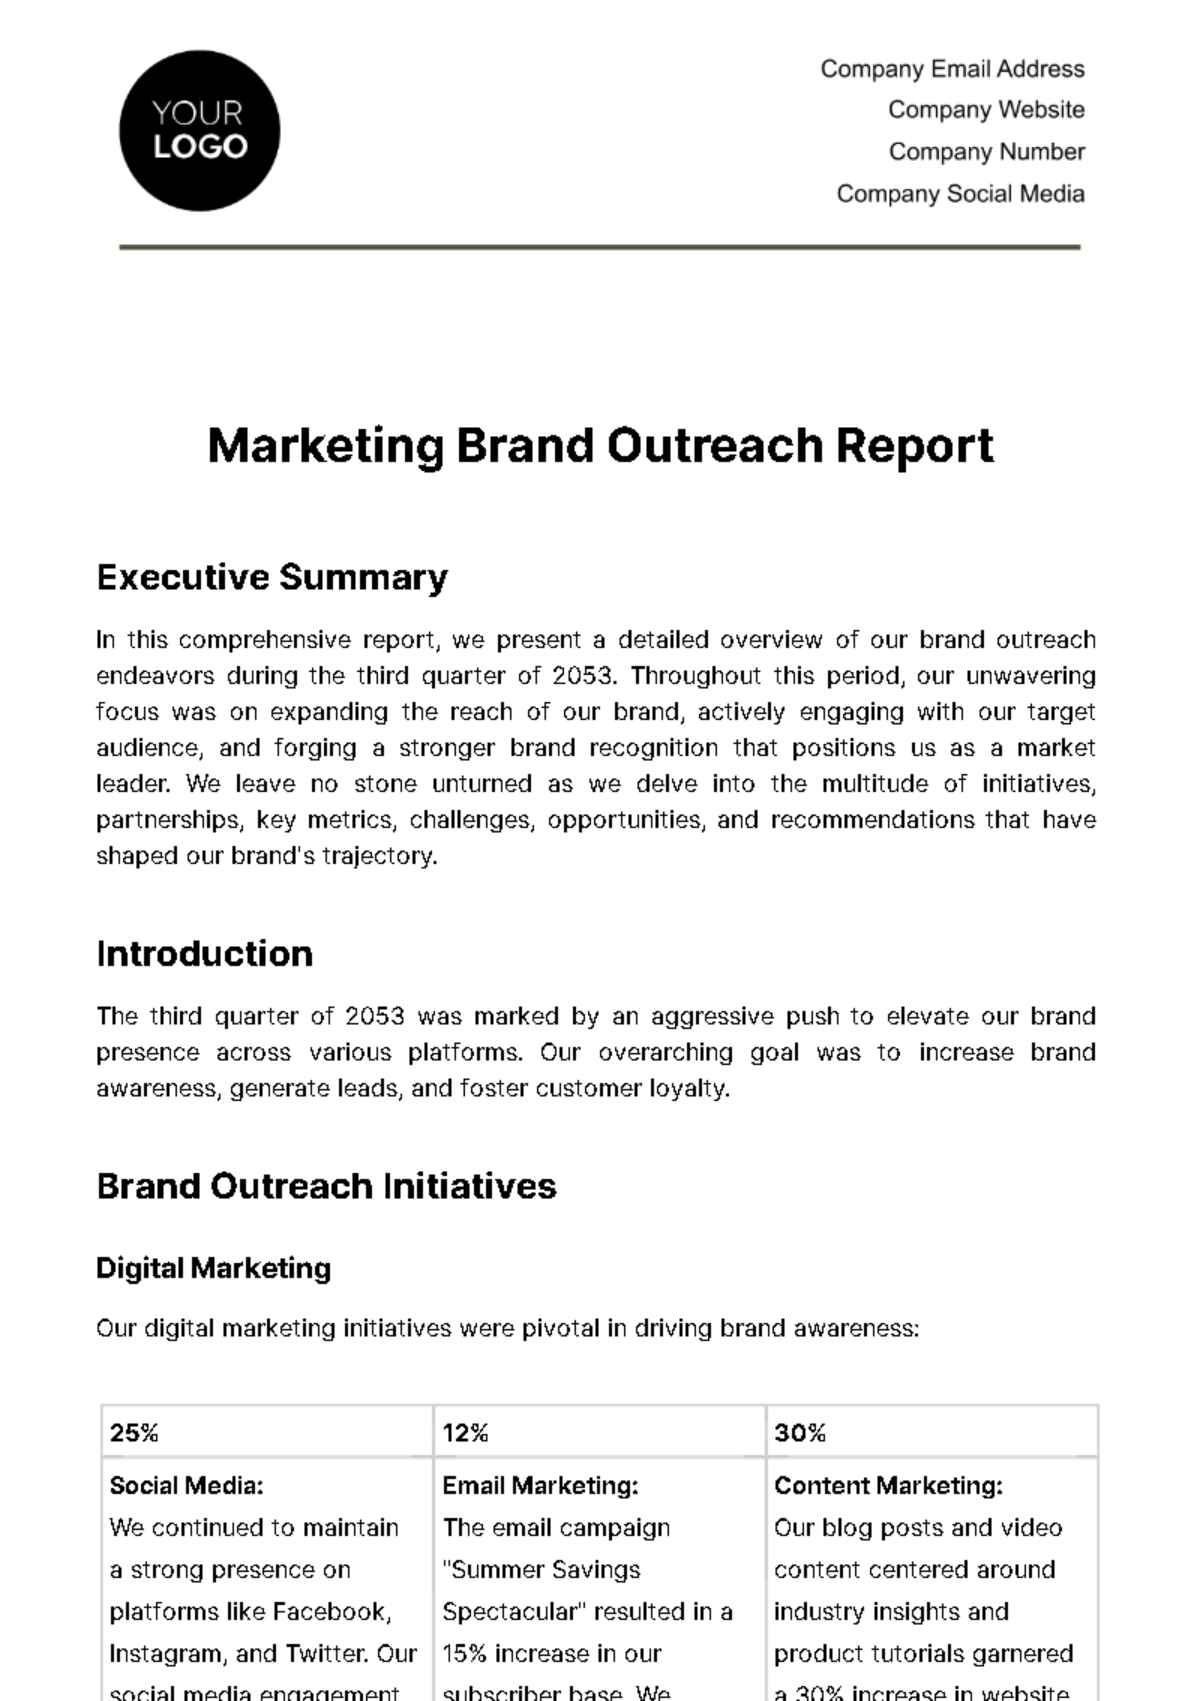 Free Marketing Brand Outreach Report Template